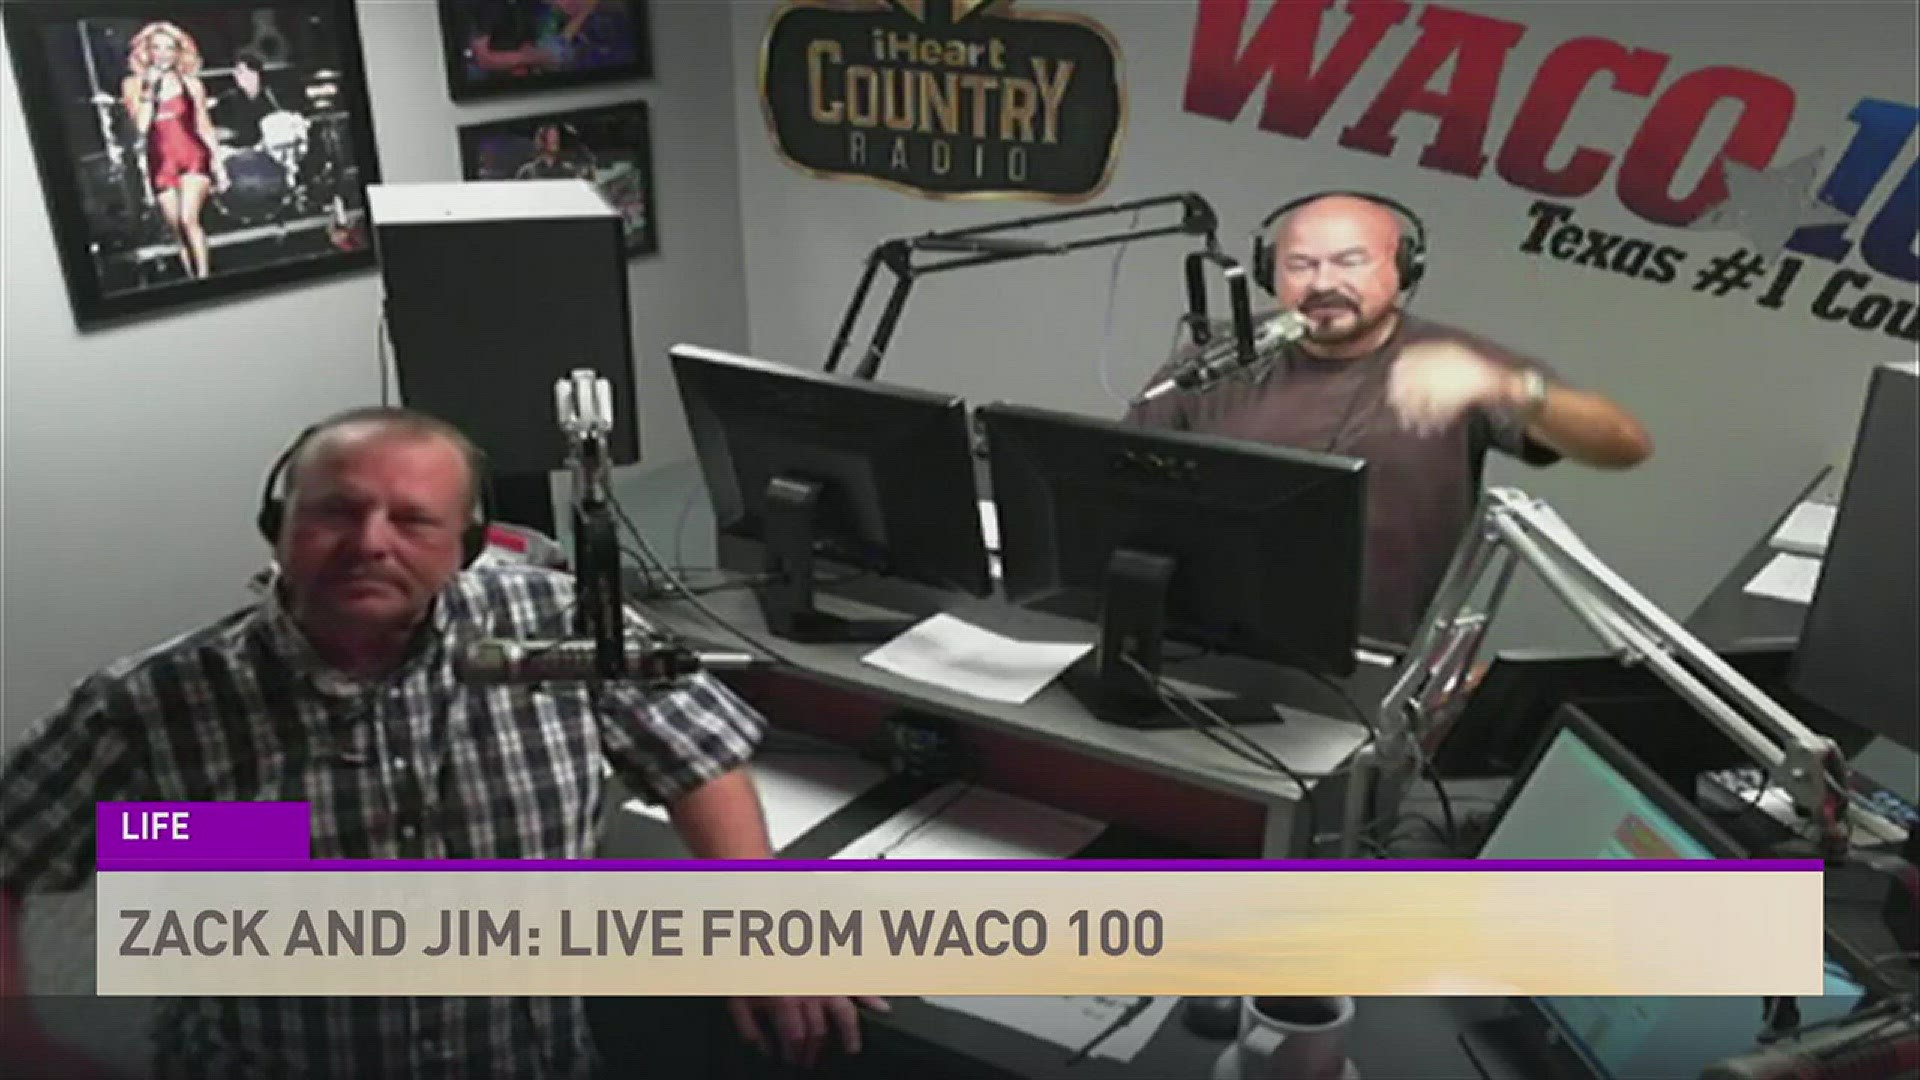 A Visit With Waco 100